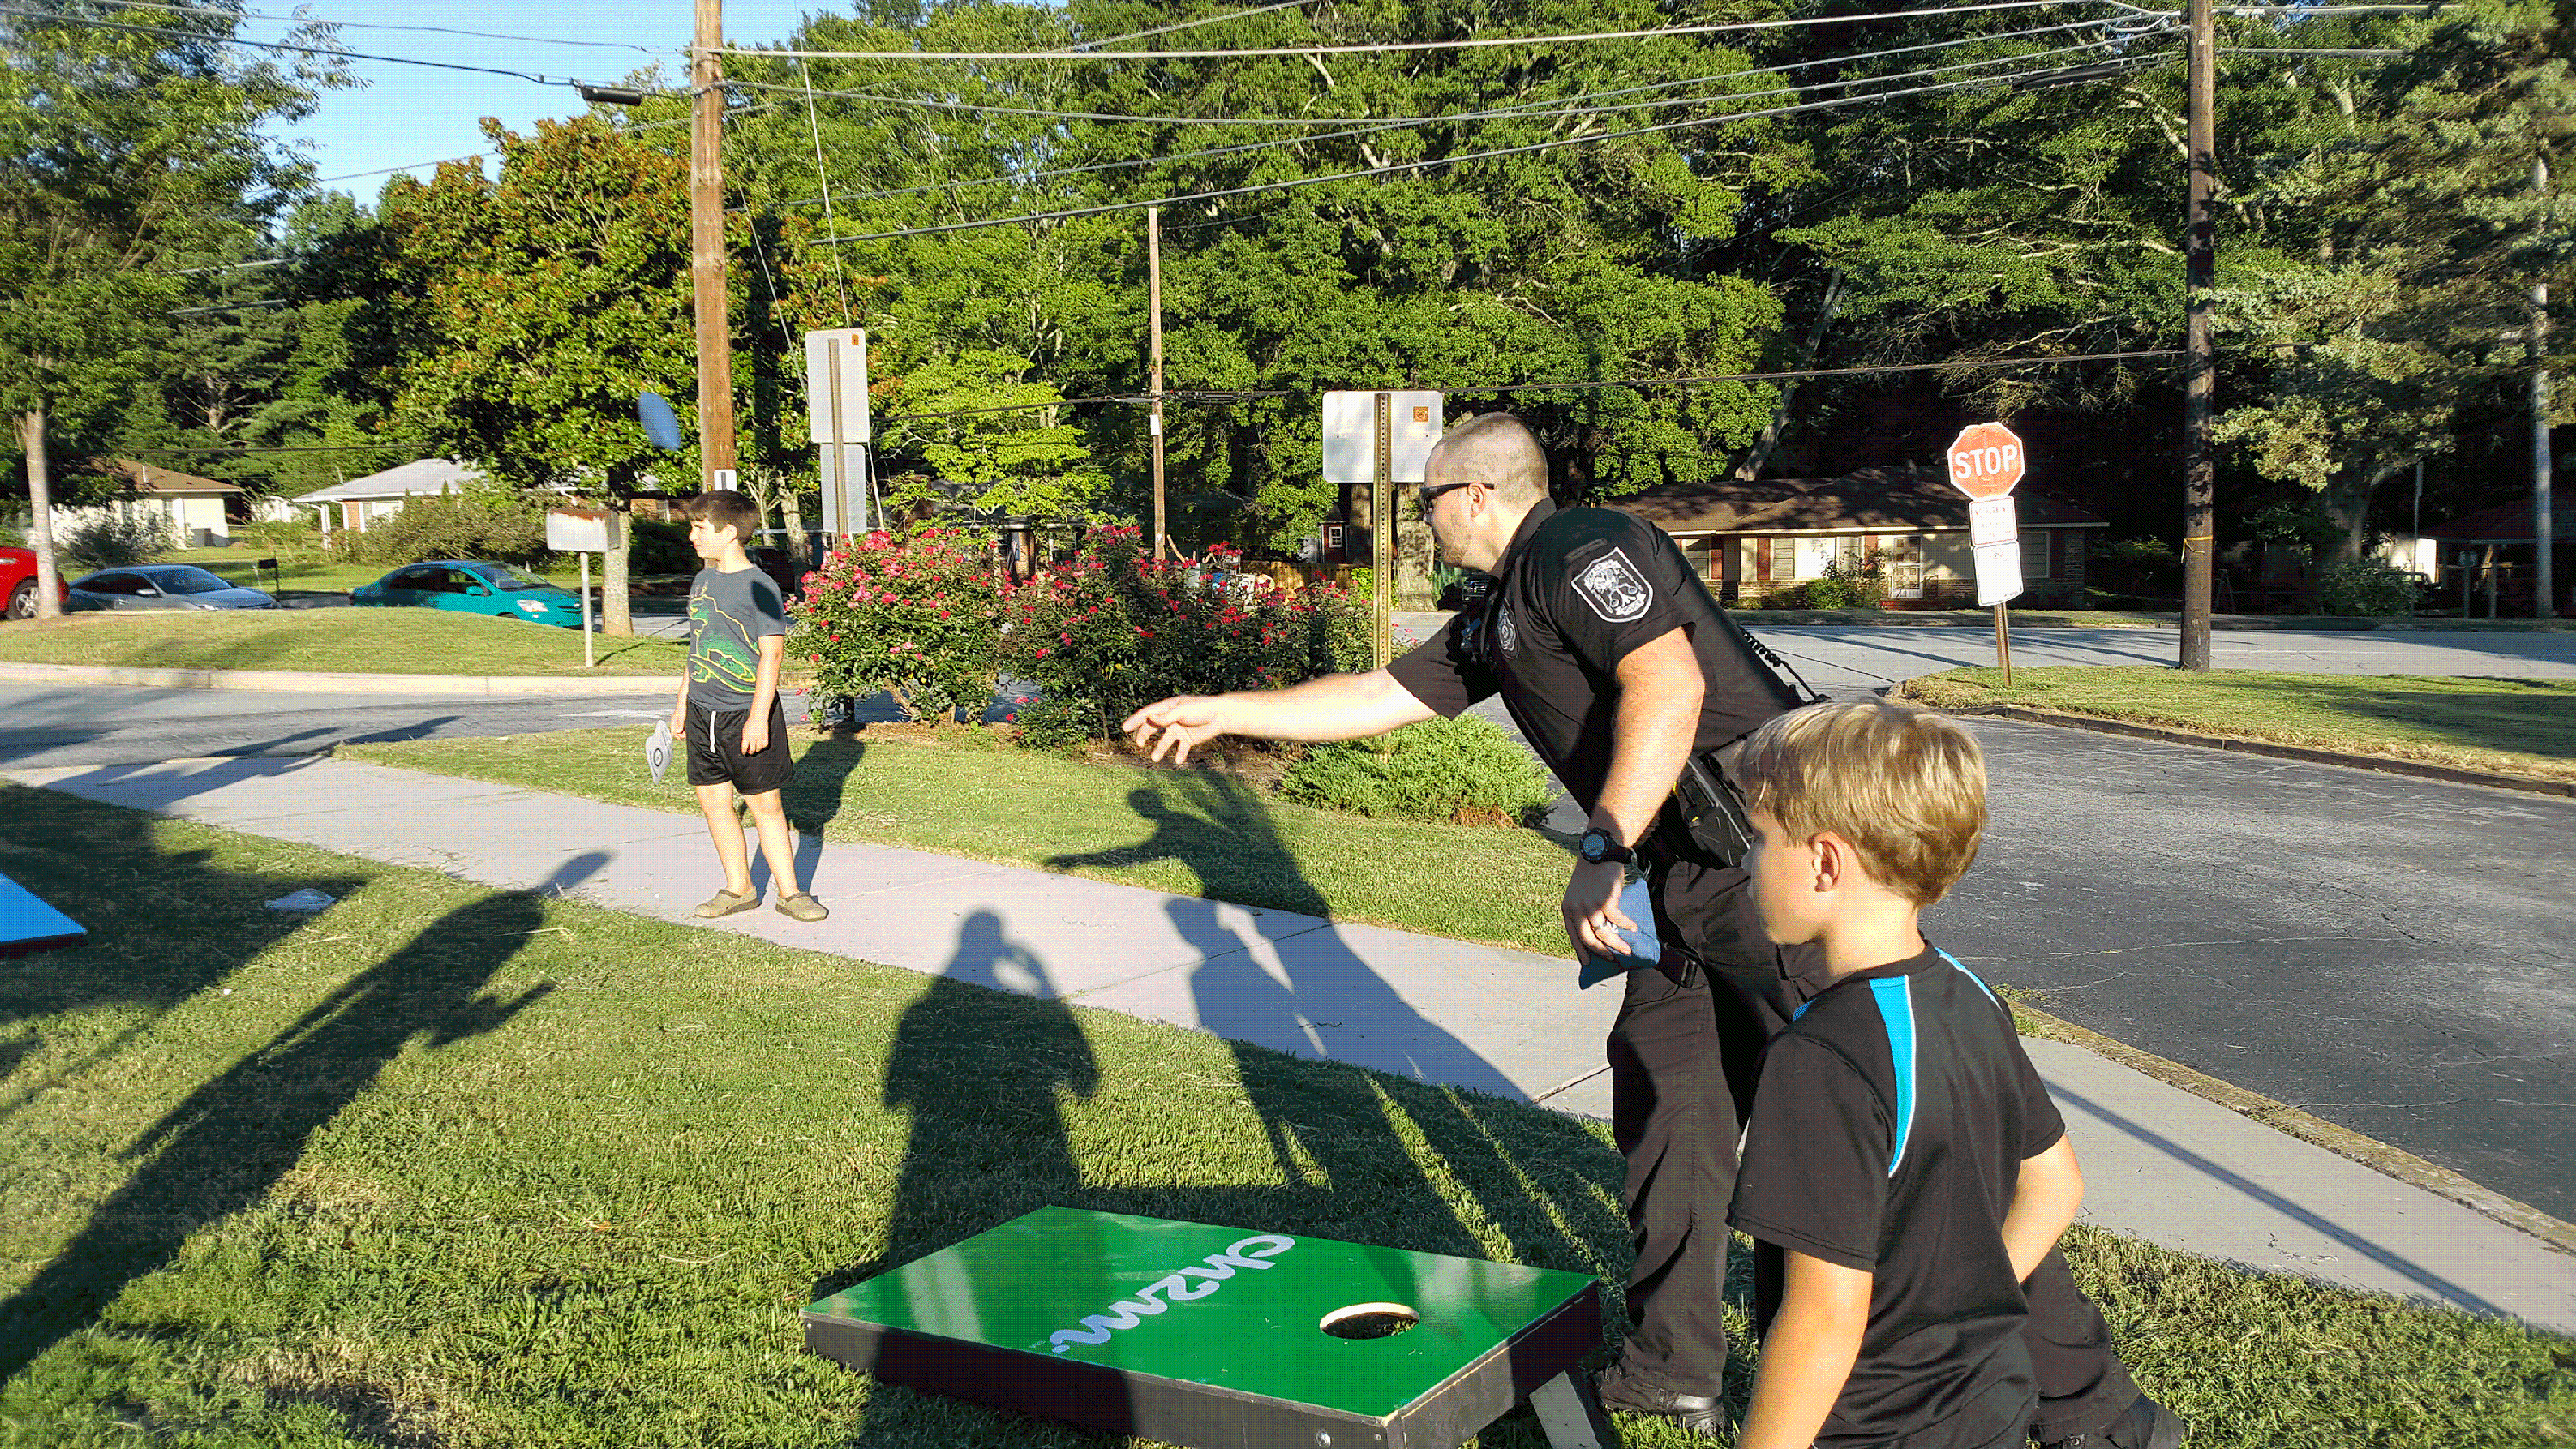 National Night Out 2021